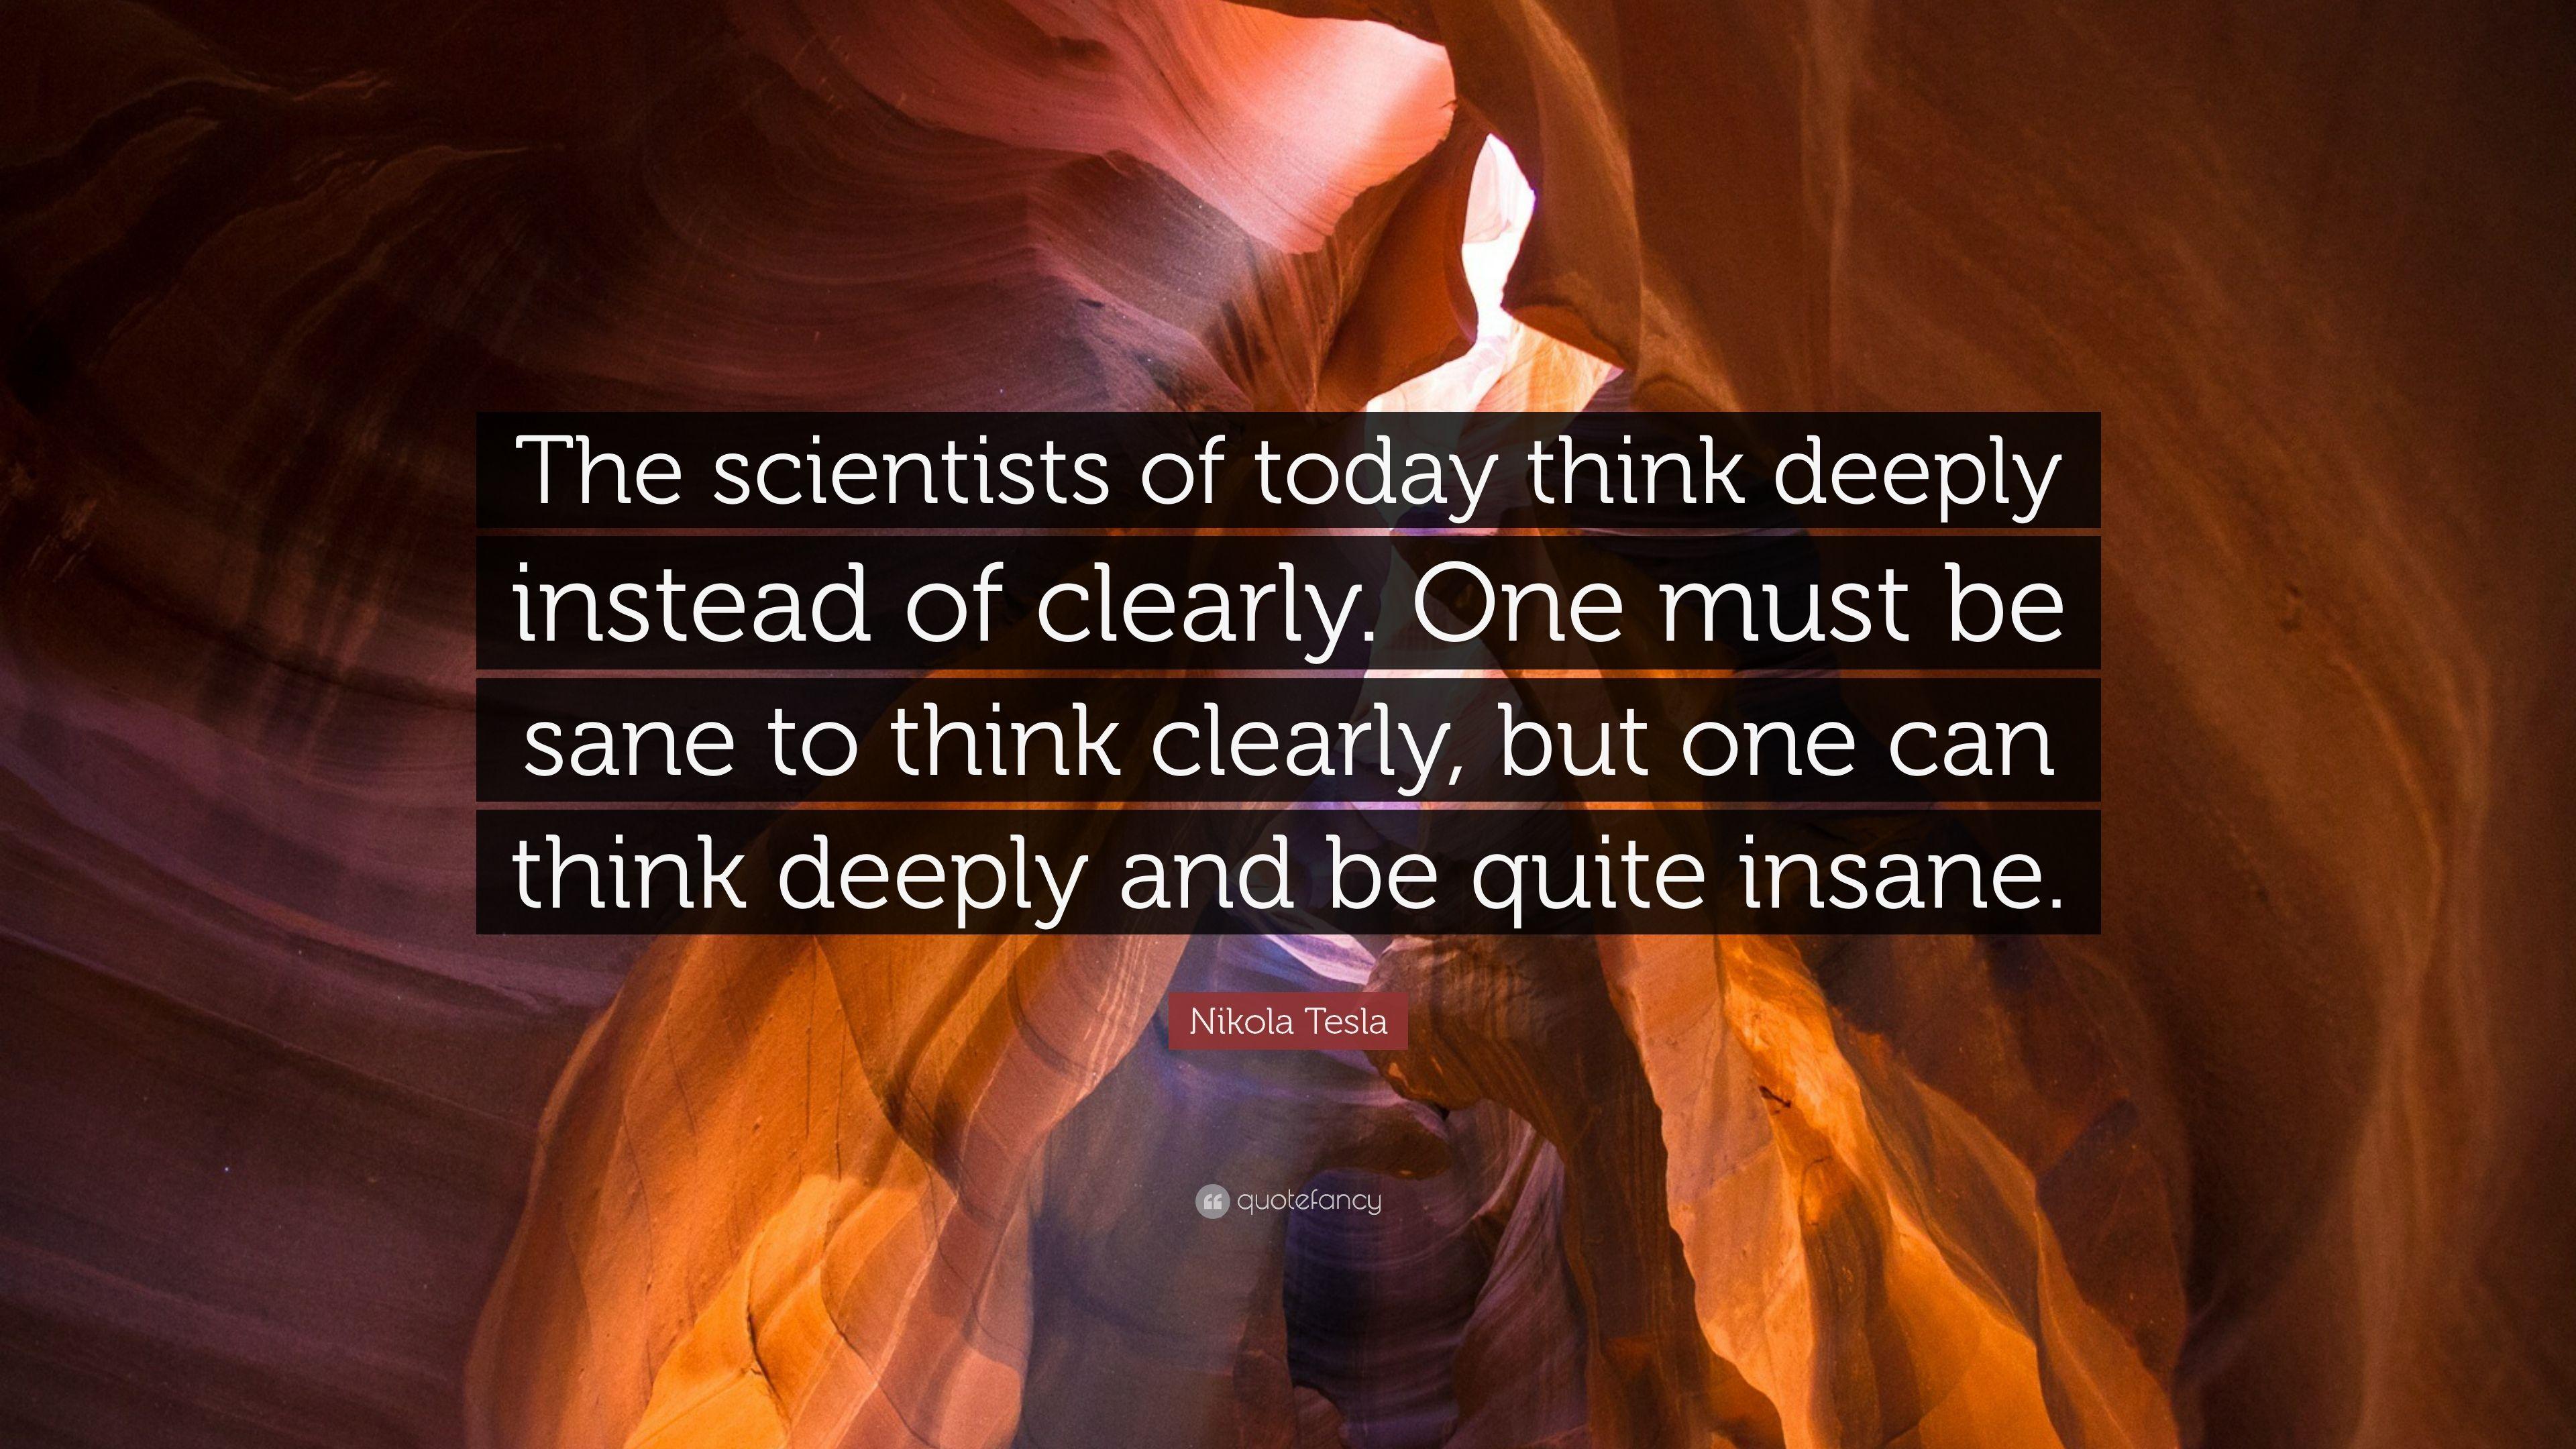 Nikola Tesla Quote: “The scientists of today think deeply instead